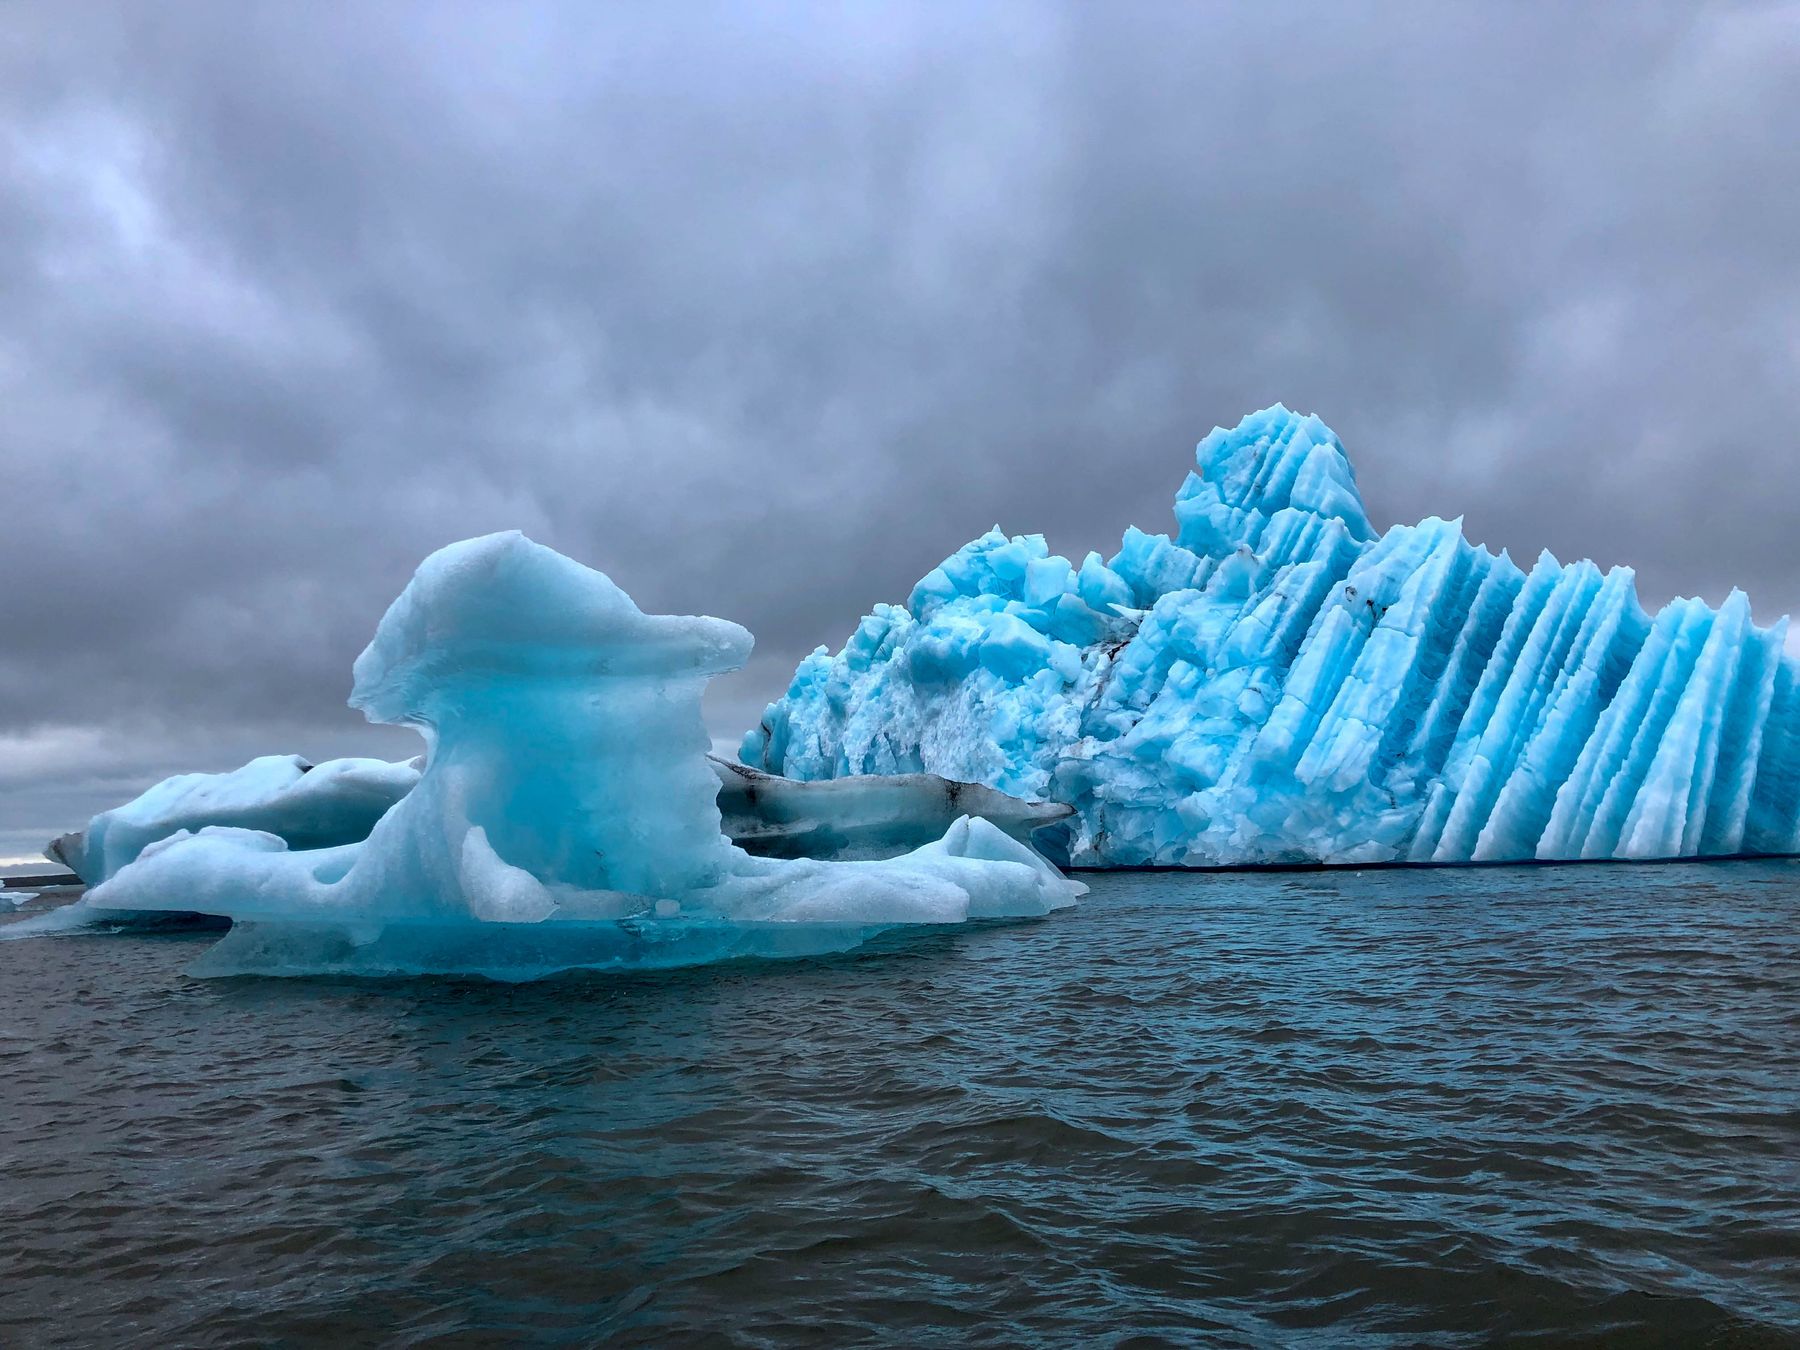 Penisberg: Global Warming Sucks and This Iceberg Was Being a Dick